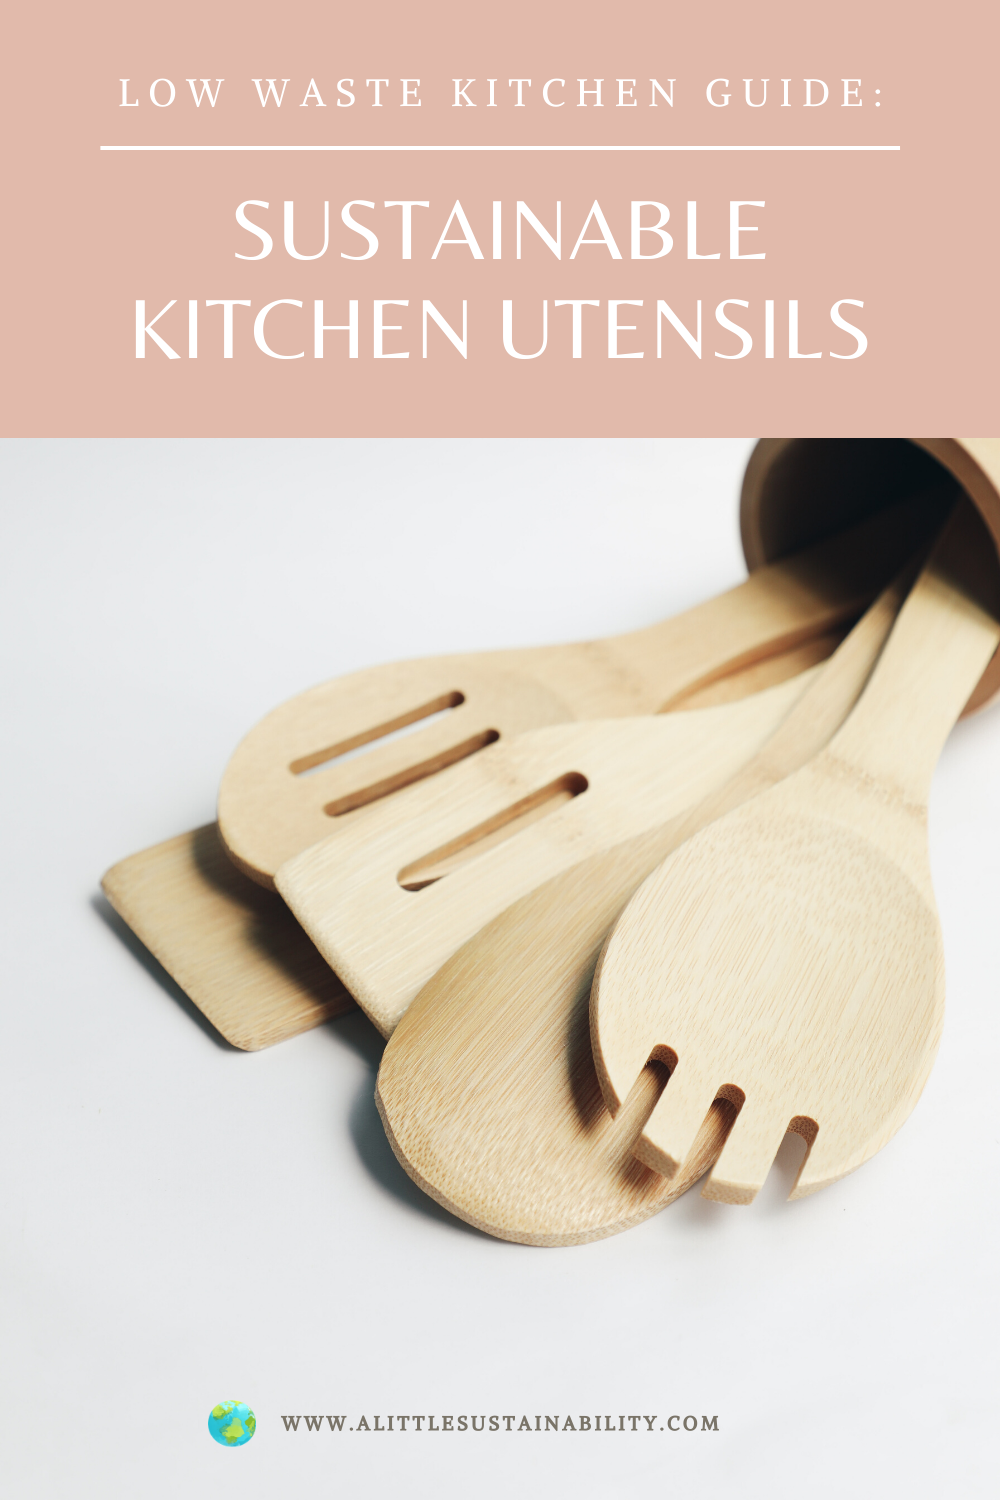 The best zero waste cutlery for an eco-friendly swap are bamboo utensils. Bamboo is a great material for all of your sustainable kitchen essentials. In this zero waste living guide we’ll show you different options for getting non-toxic and plastic free utensils both for cooking and on-the-go travel kits.